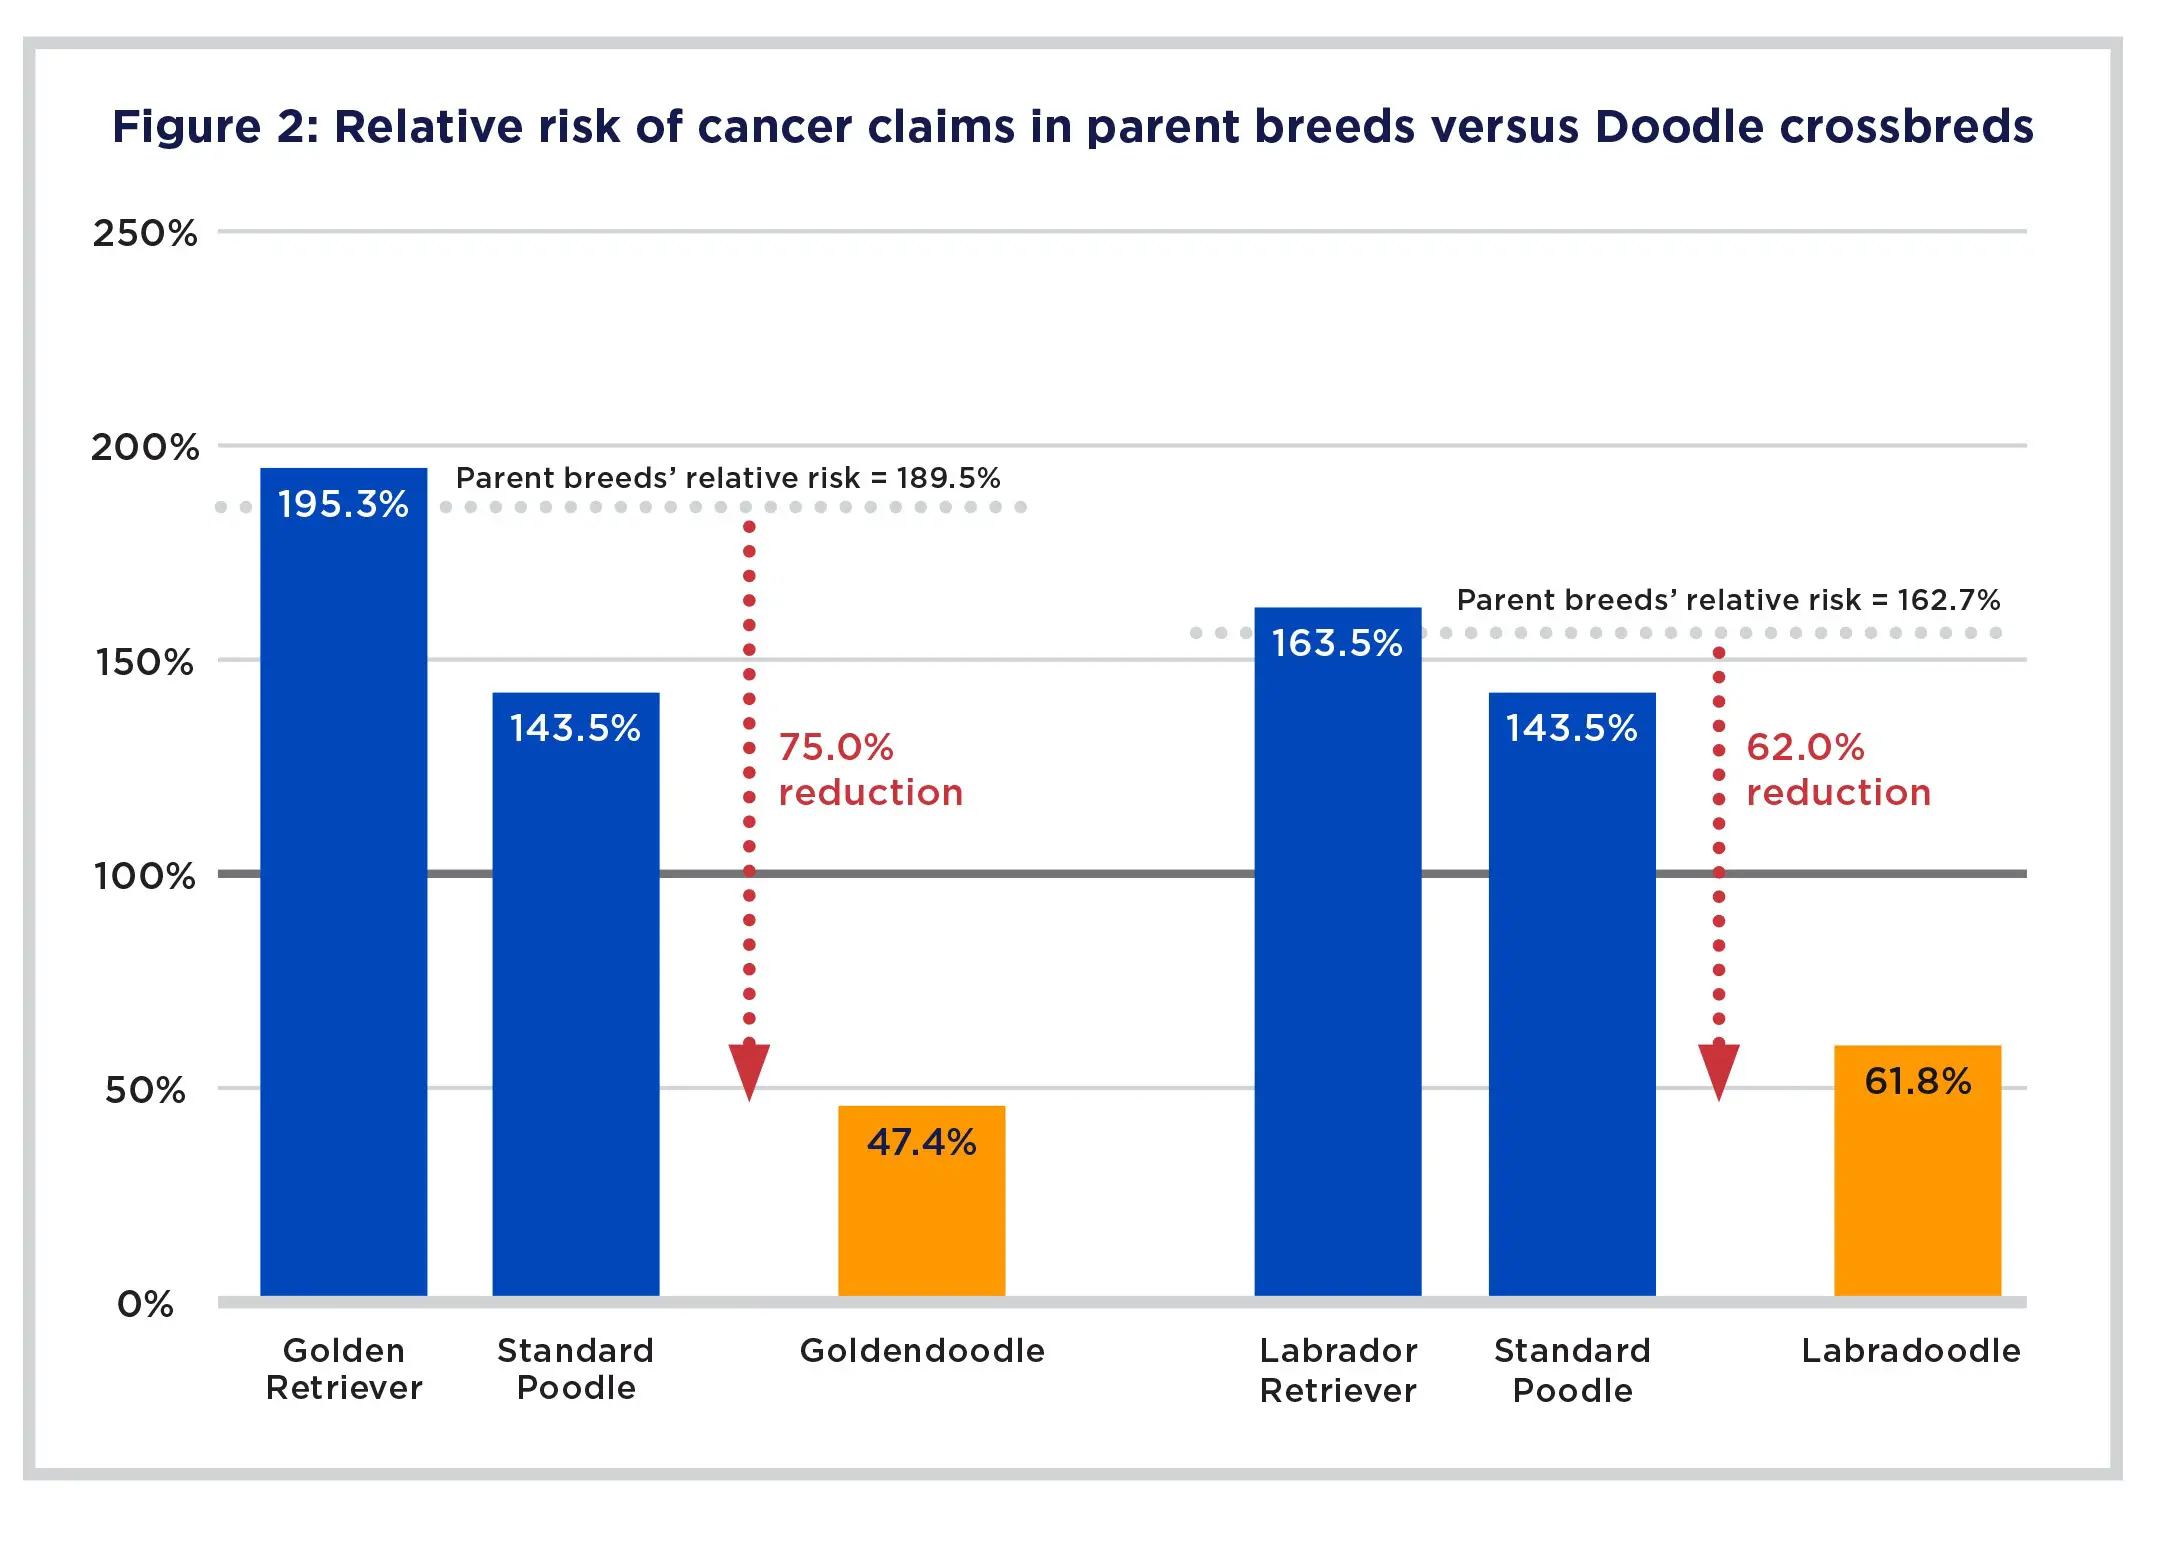 doodle data chart showing relative risk of cancer claims between doodle dogs and parent breeds